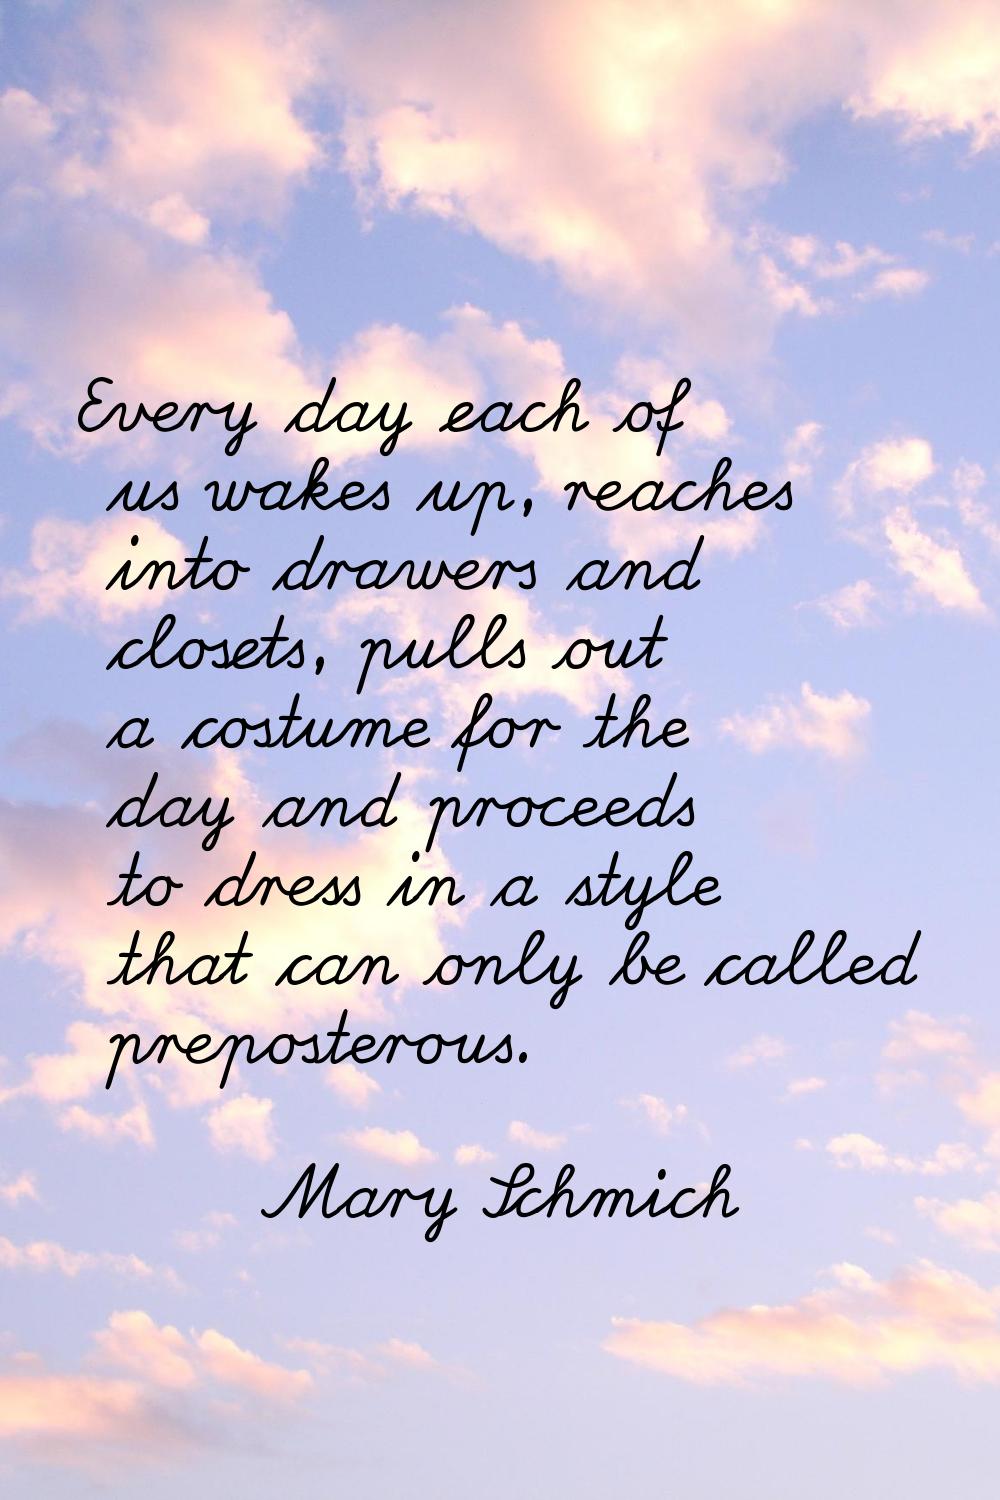 Every day each of us wakes up, reaches into drawers and closets, pulls out a costume for the day an